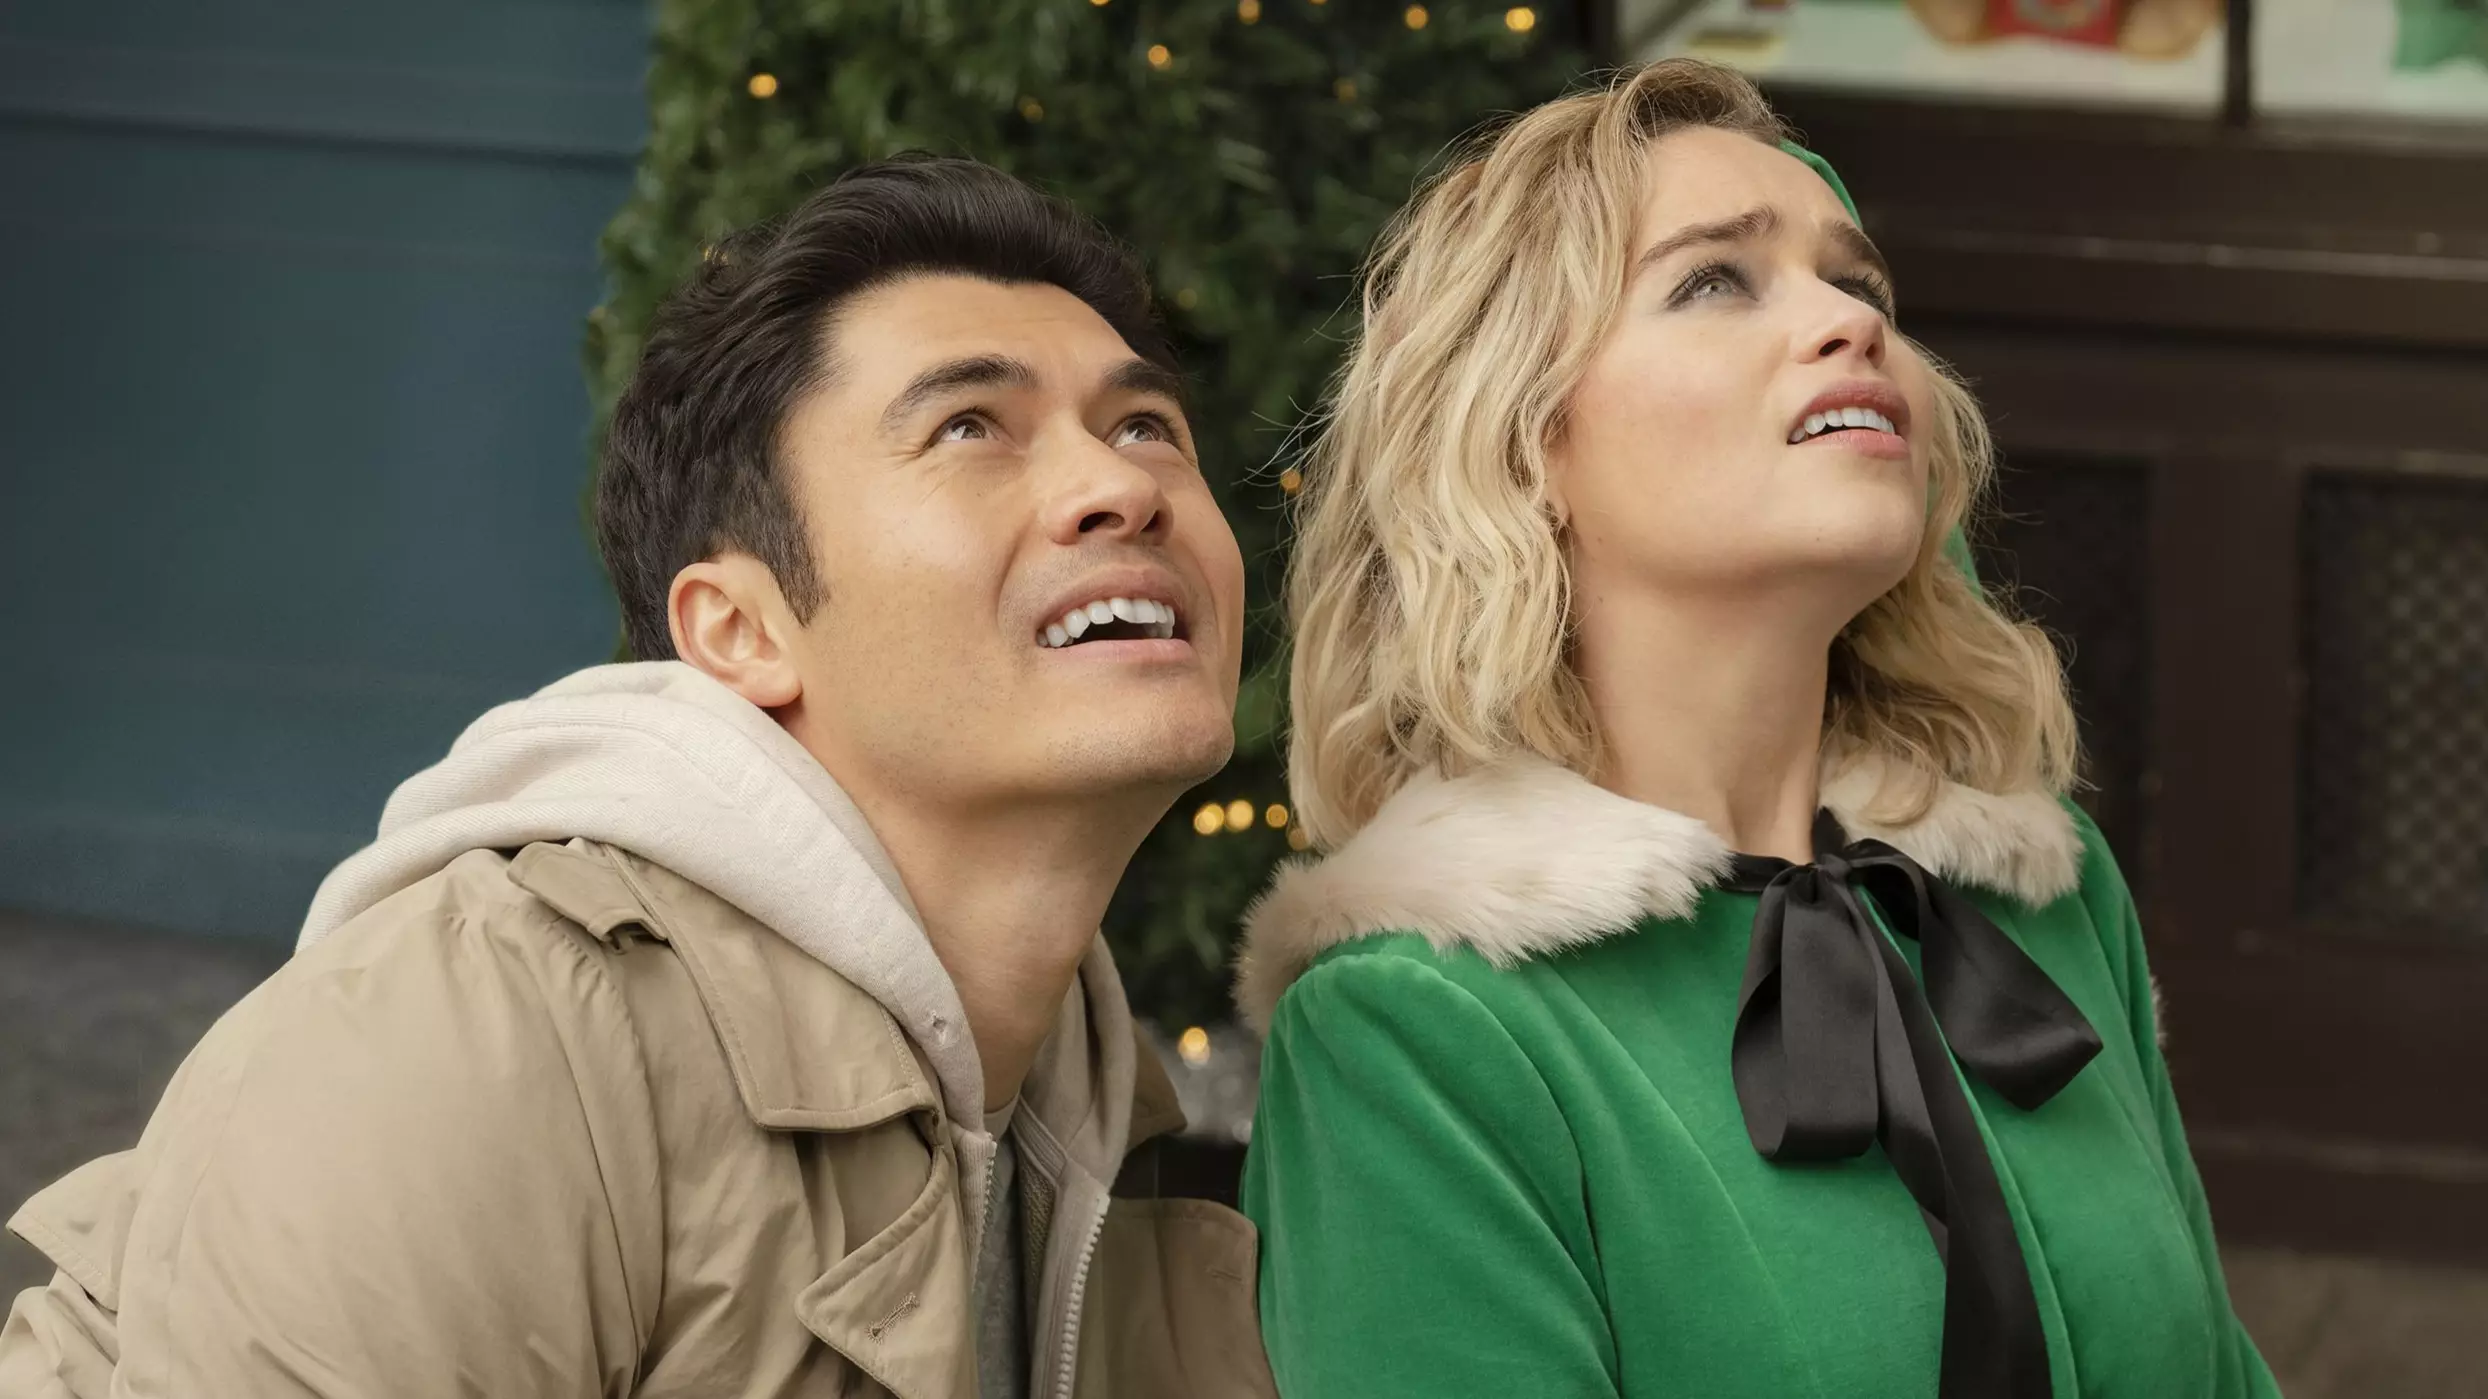 The Reviews For 'Last Christmas' Are In – And It's A Festive Treat